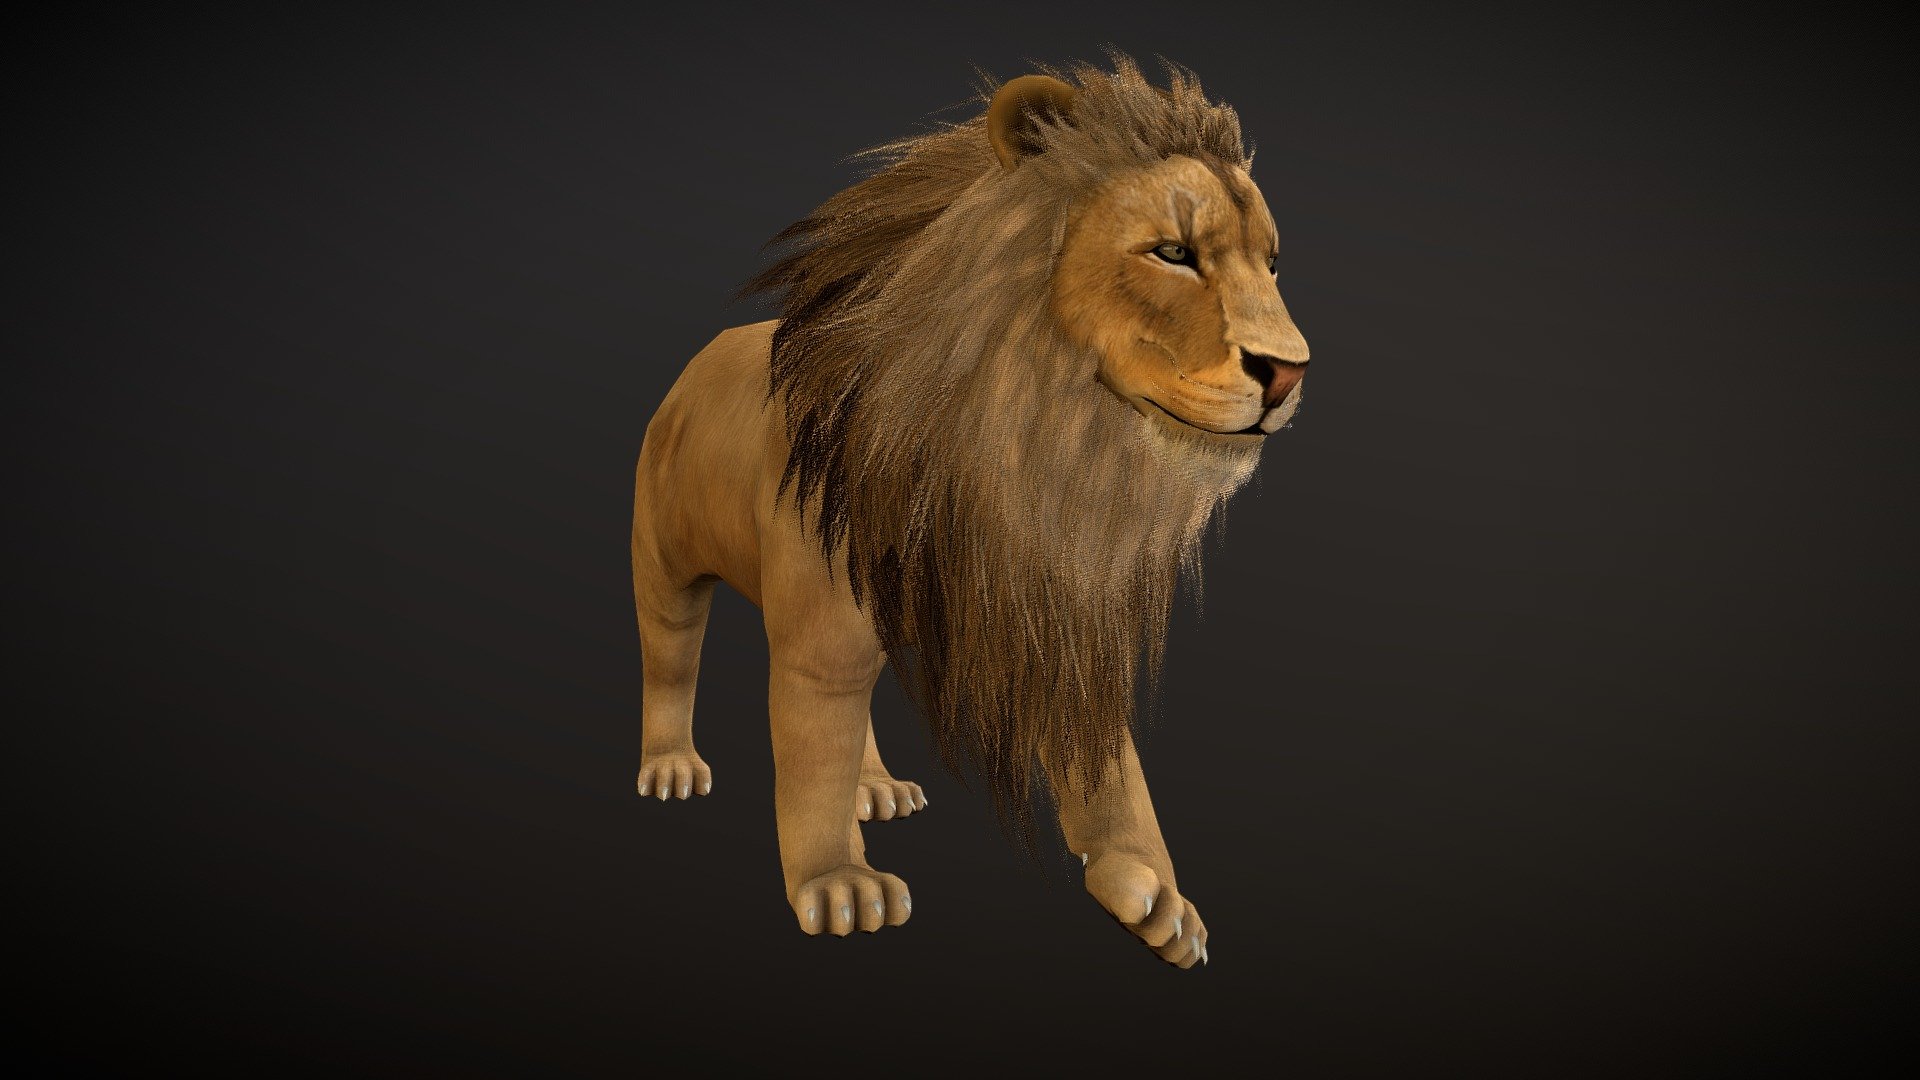 Low poly Lion game asset model and fur handpainted practice

Follow my profile :




instagram.com/menglow90 

artstation.com/menglow
 - Lion - 3D model by menglow 3d model